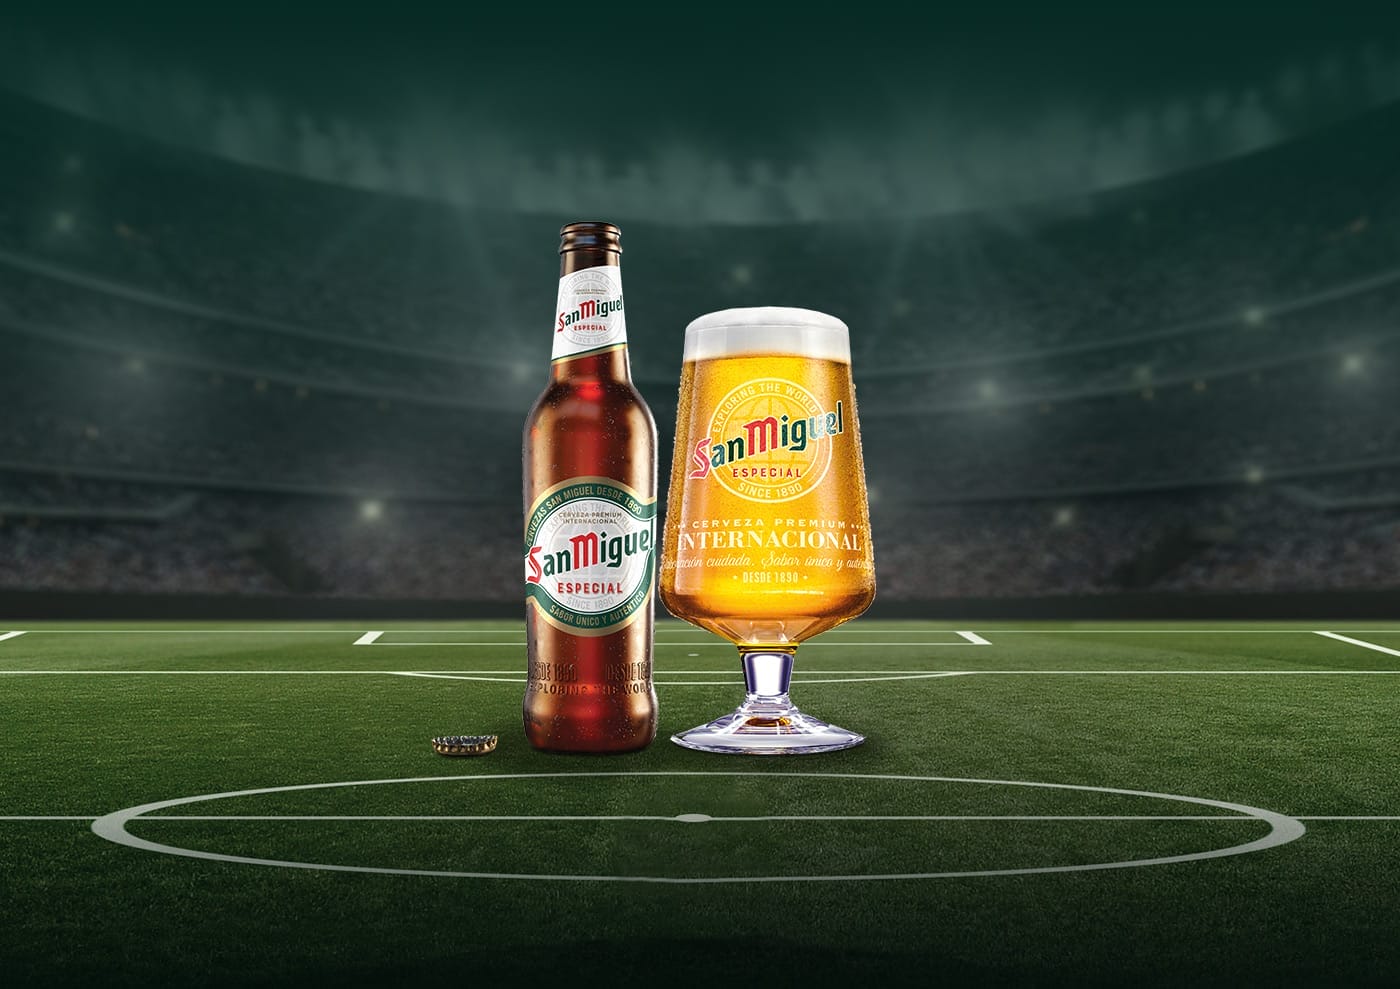 SAN MIGUEL The official beer of LaLiga